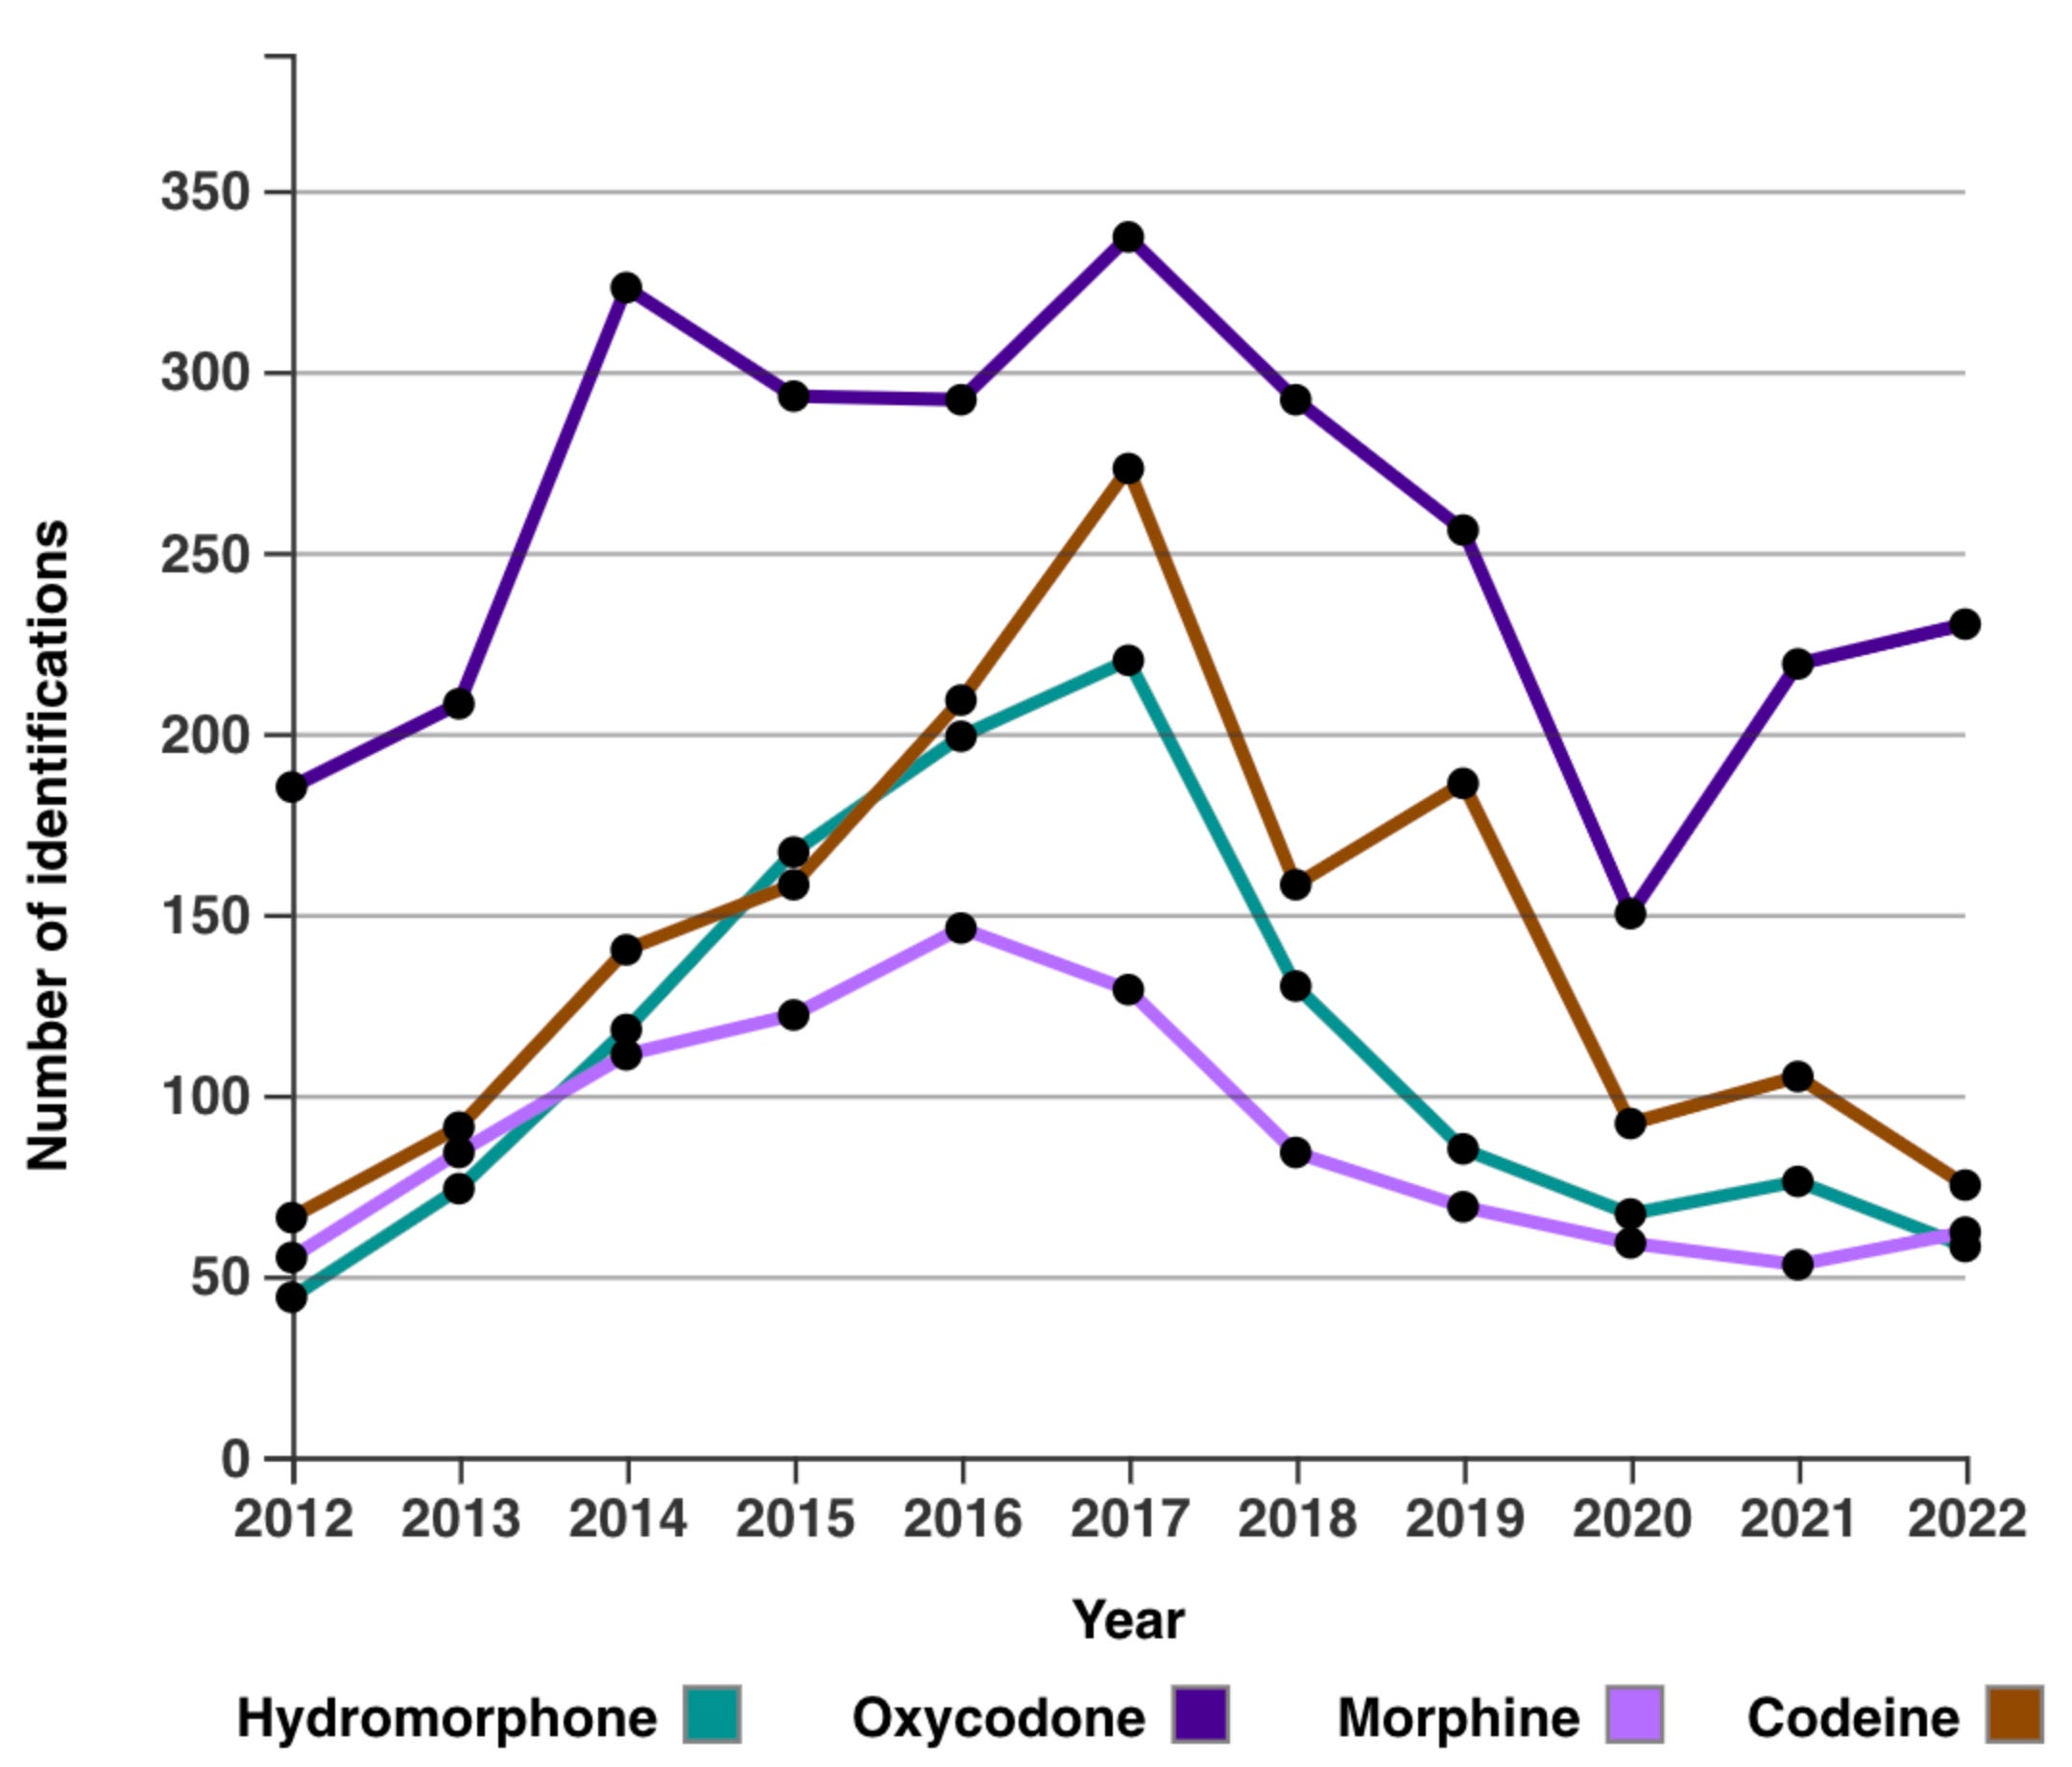 Graph showing how pharmaceutical opioids seized by police increased from 2012 to about 2017 and then dropped off again over the subsequent years. This coincides with the rise of fentanyl, and de-prescribing of pharmaceutical opioids